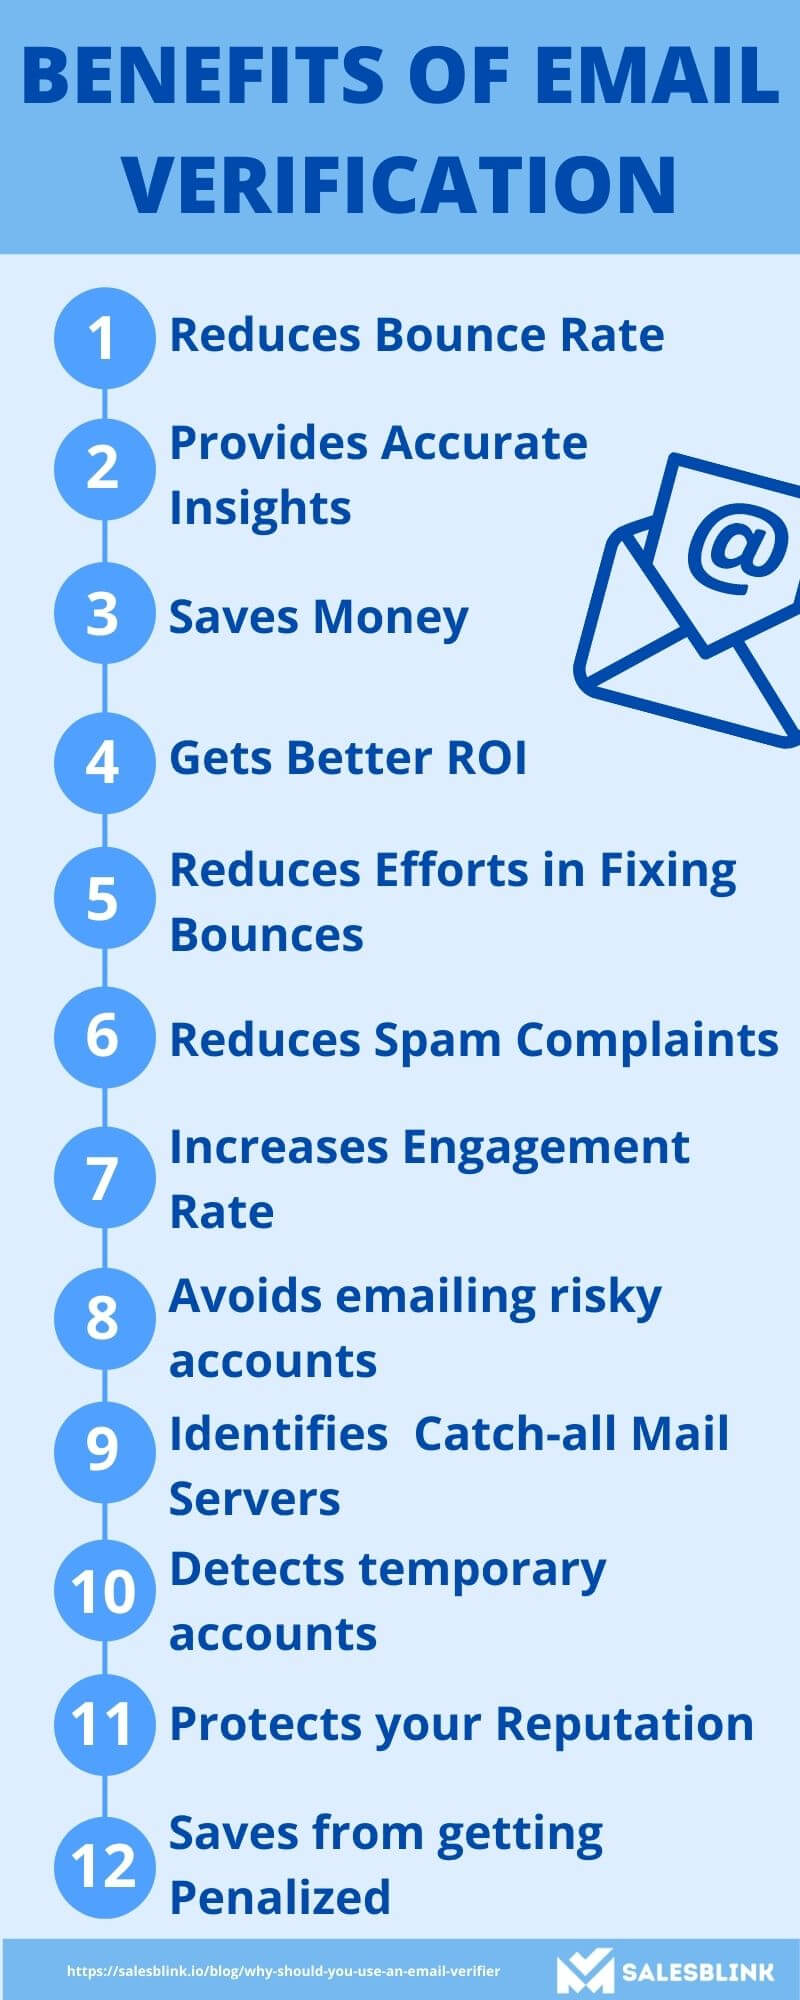 Benefits of Email Verification 